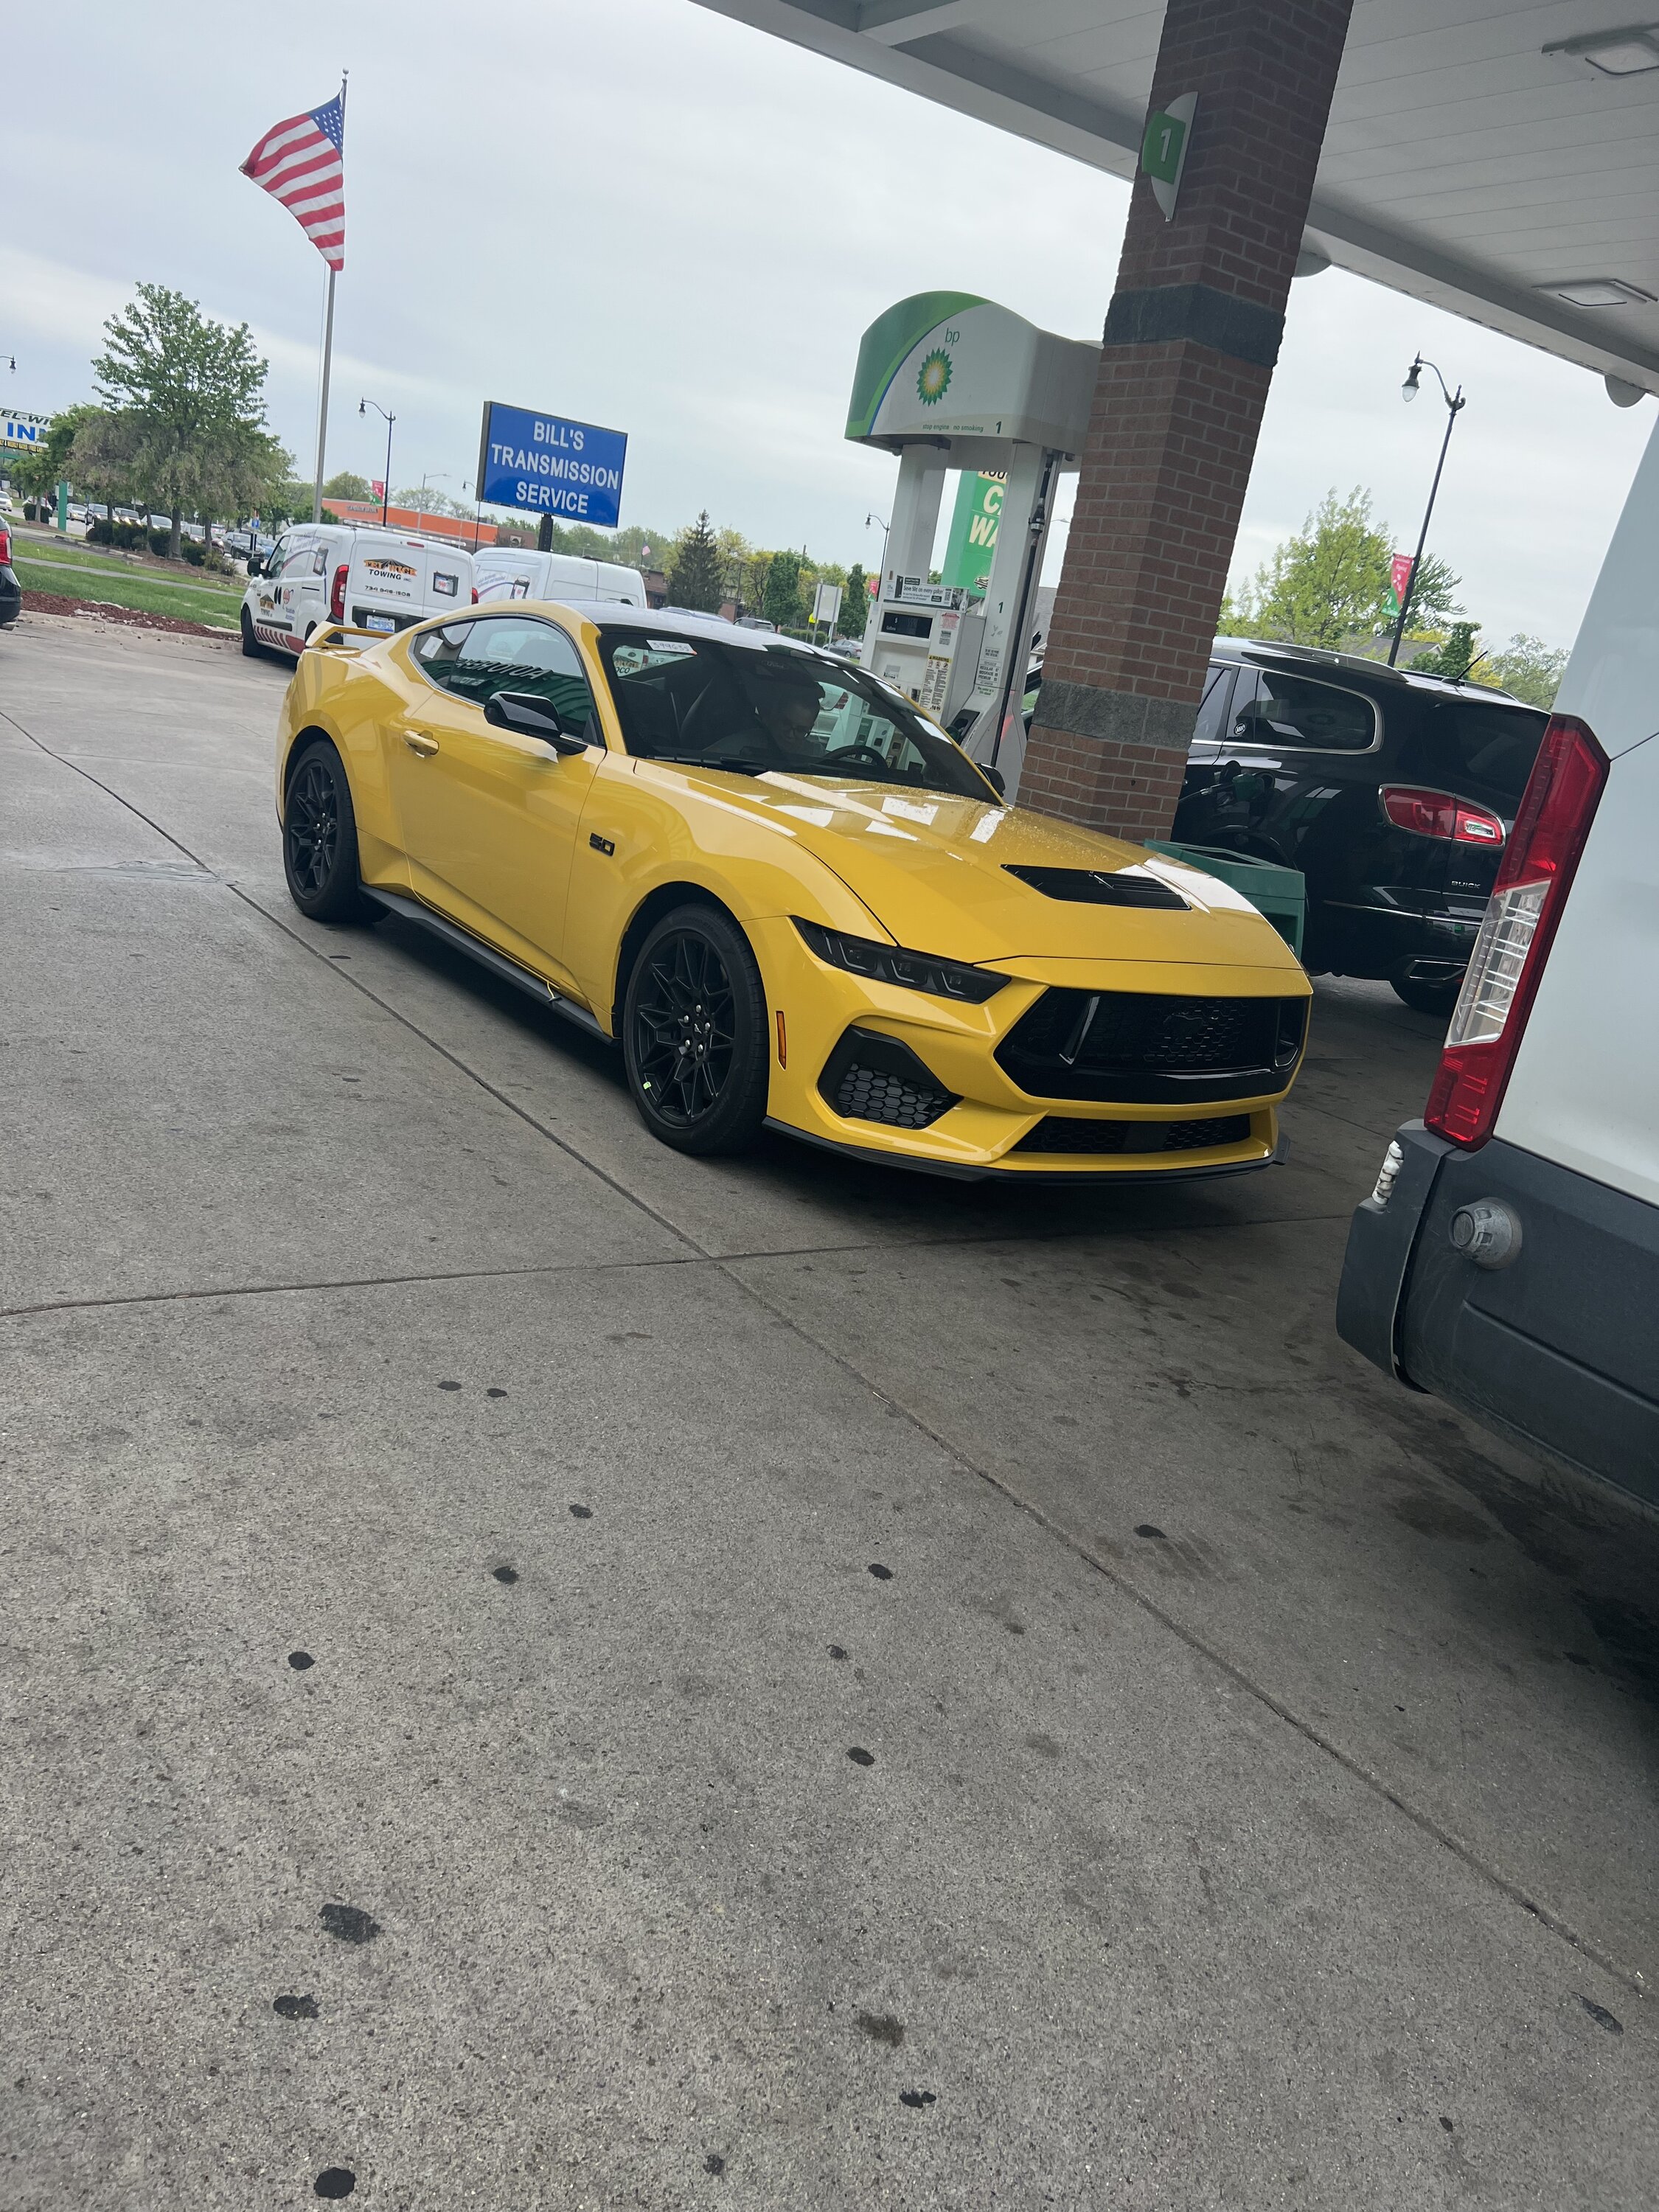 S650 Mustang New Ford Mustang picture video spotted thread! IMG_0927